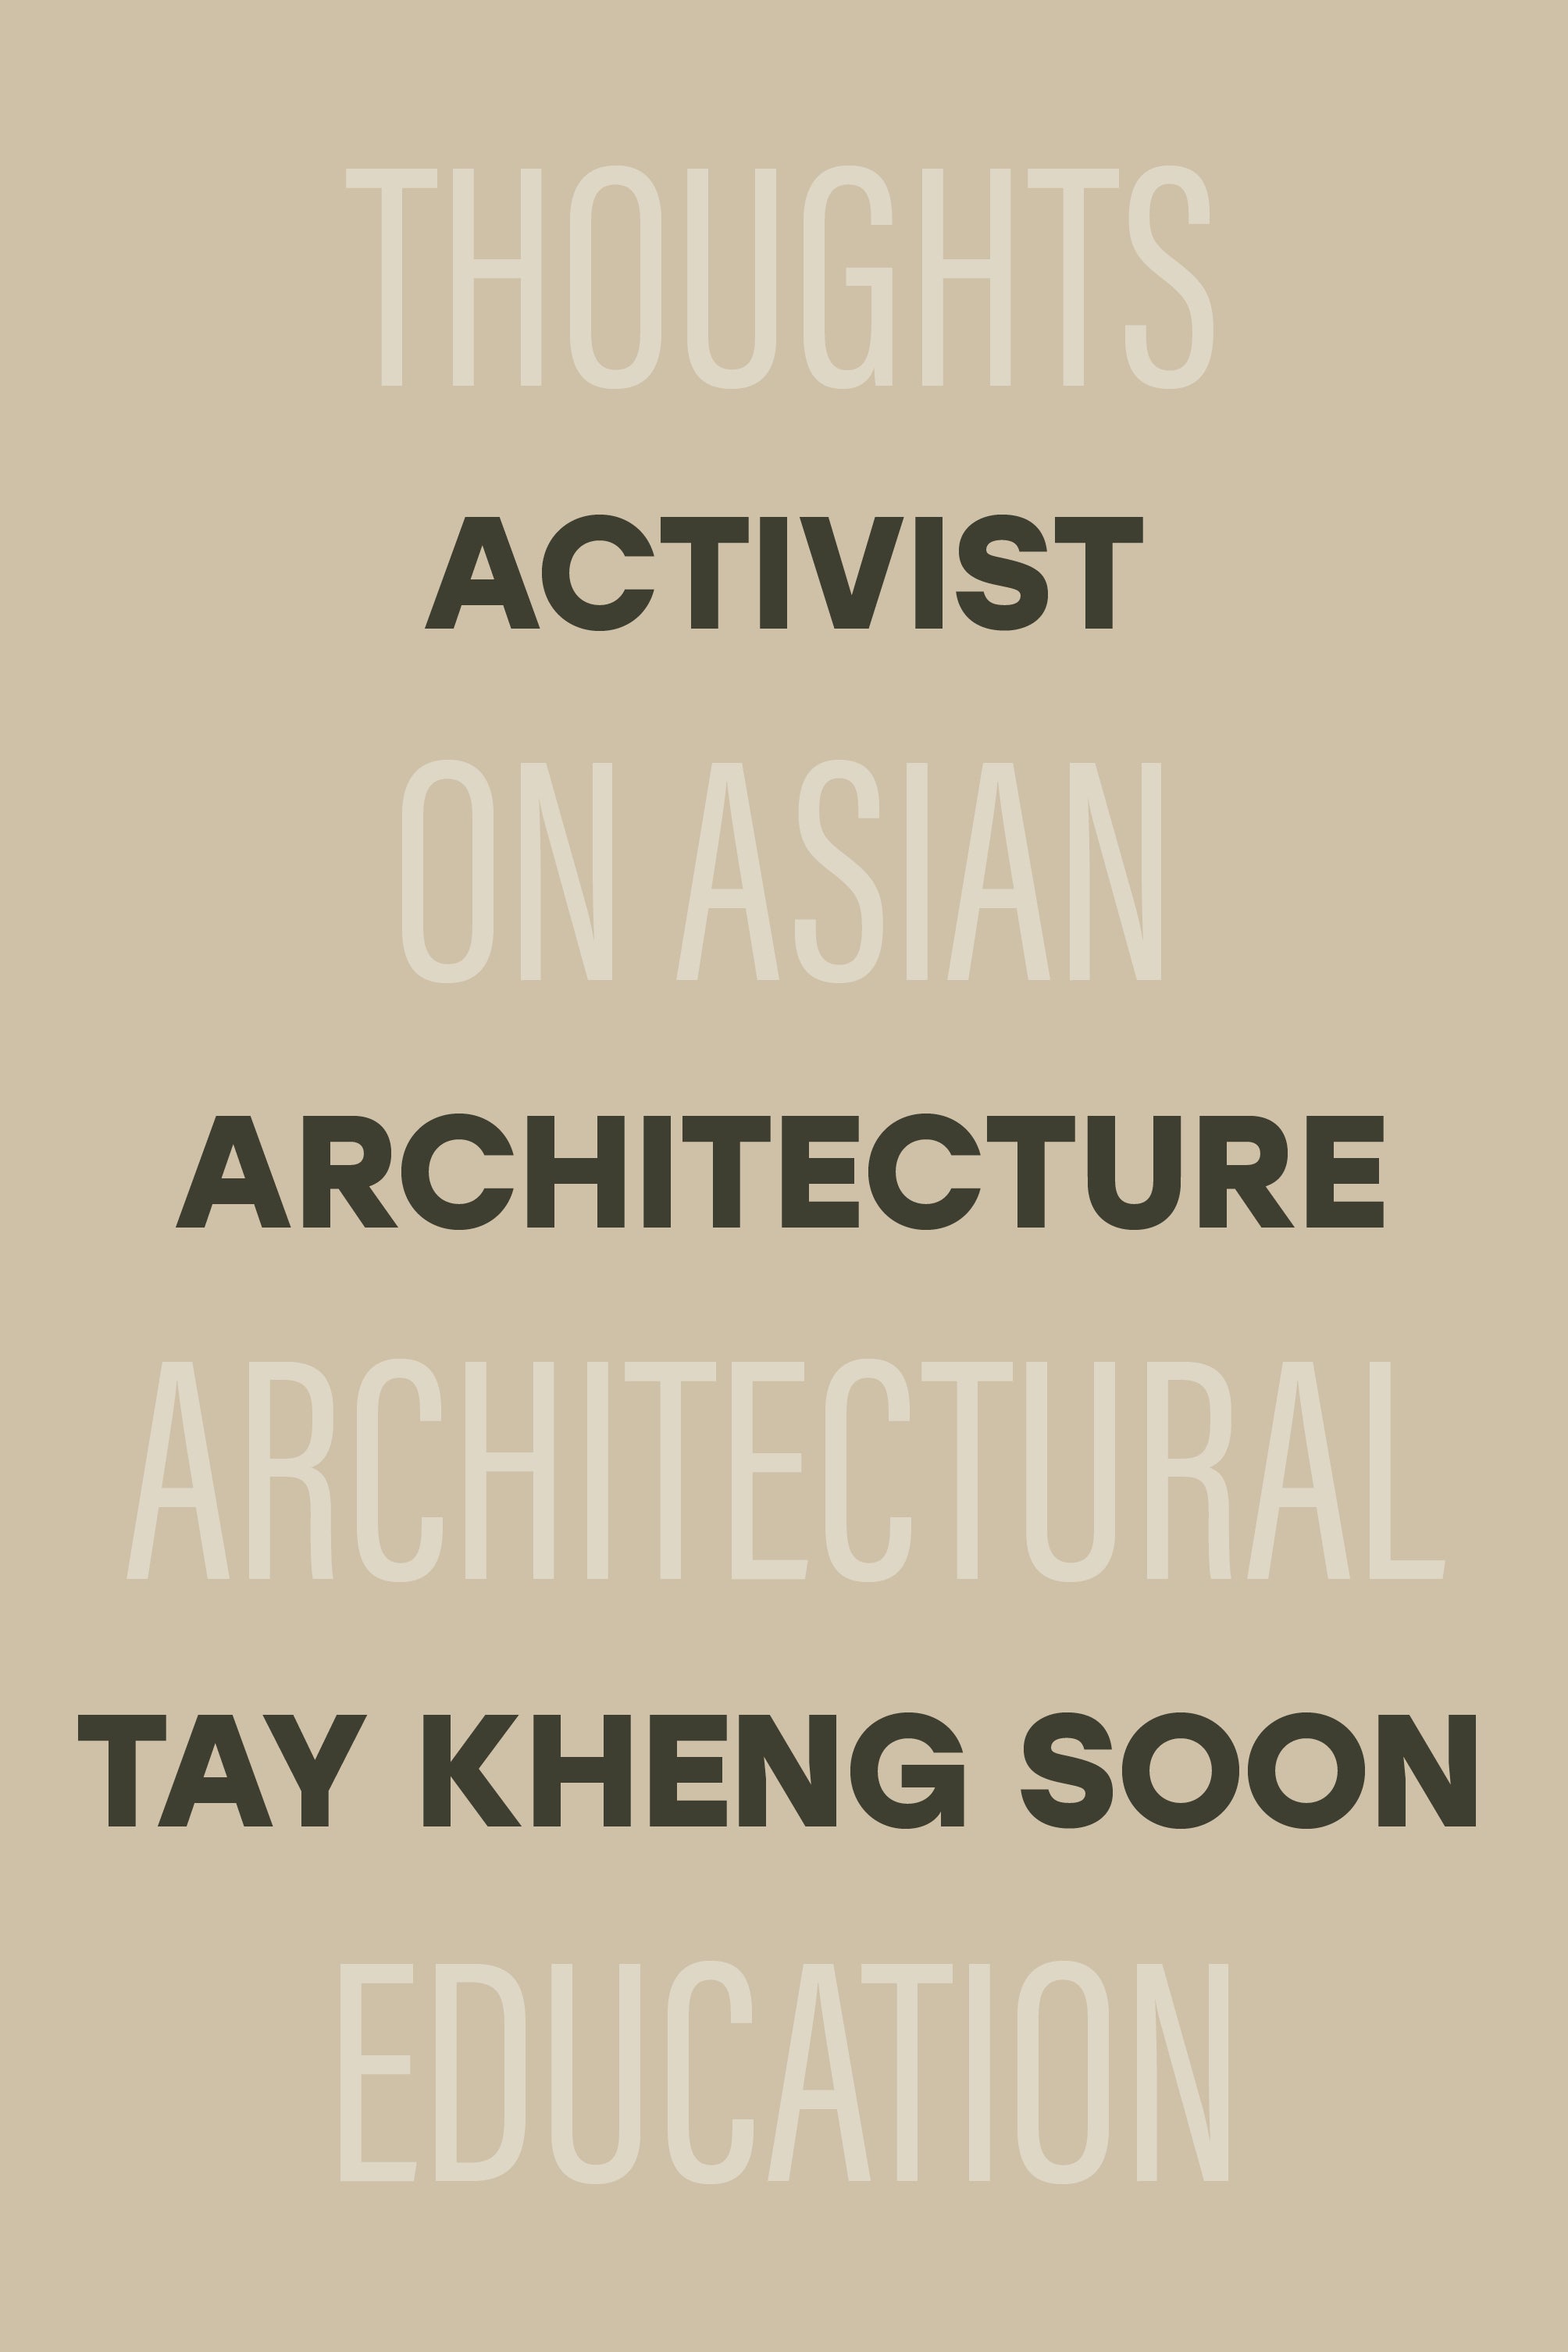 Activist Architecture: Thoughts on Asian Architectural Education